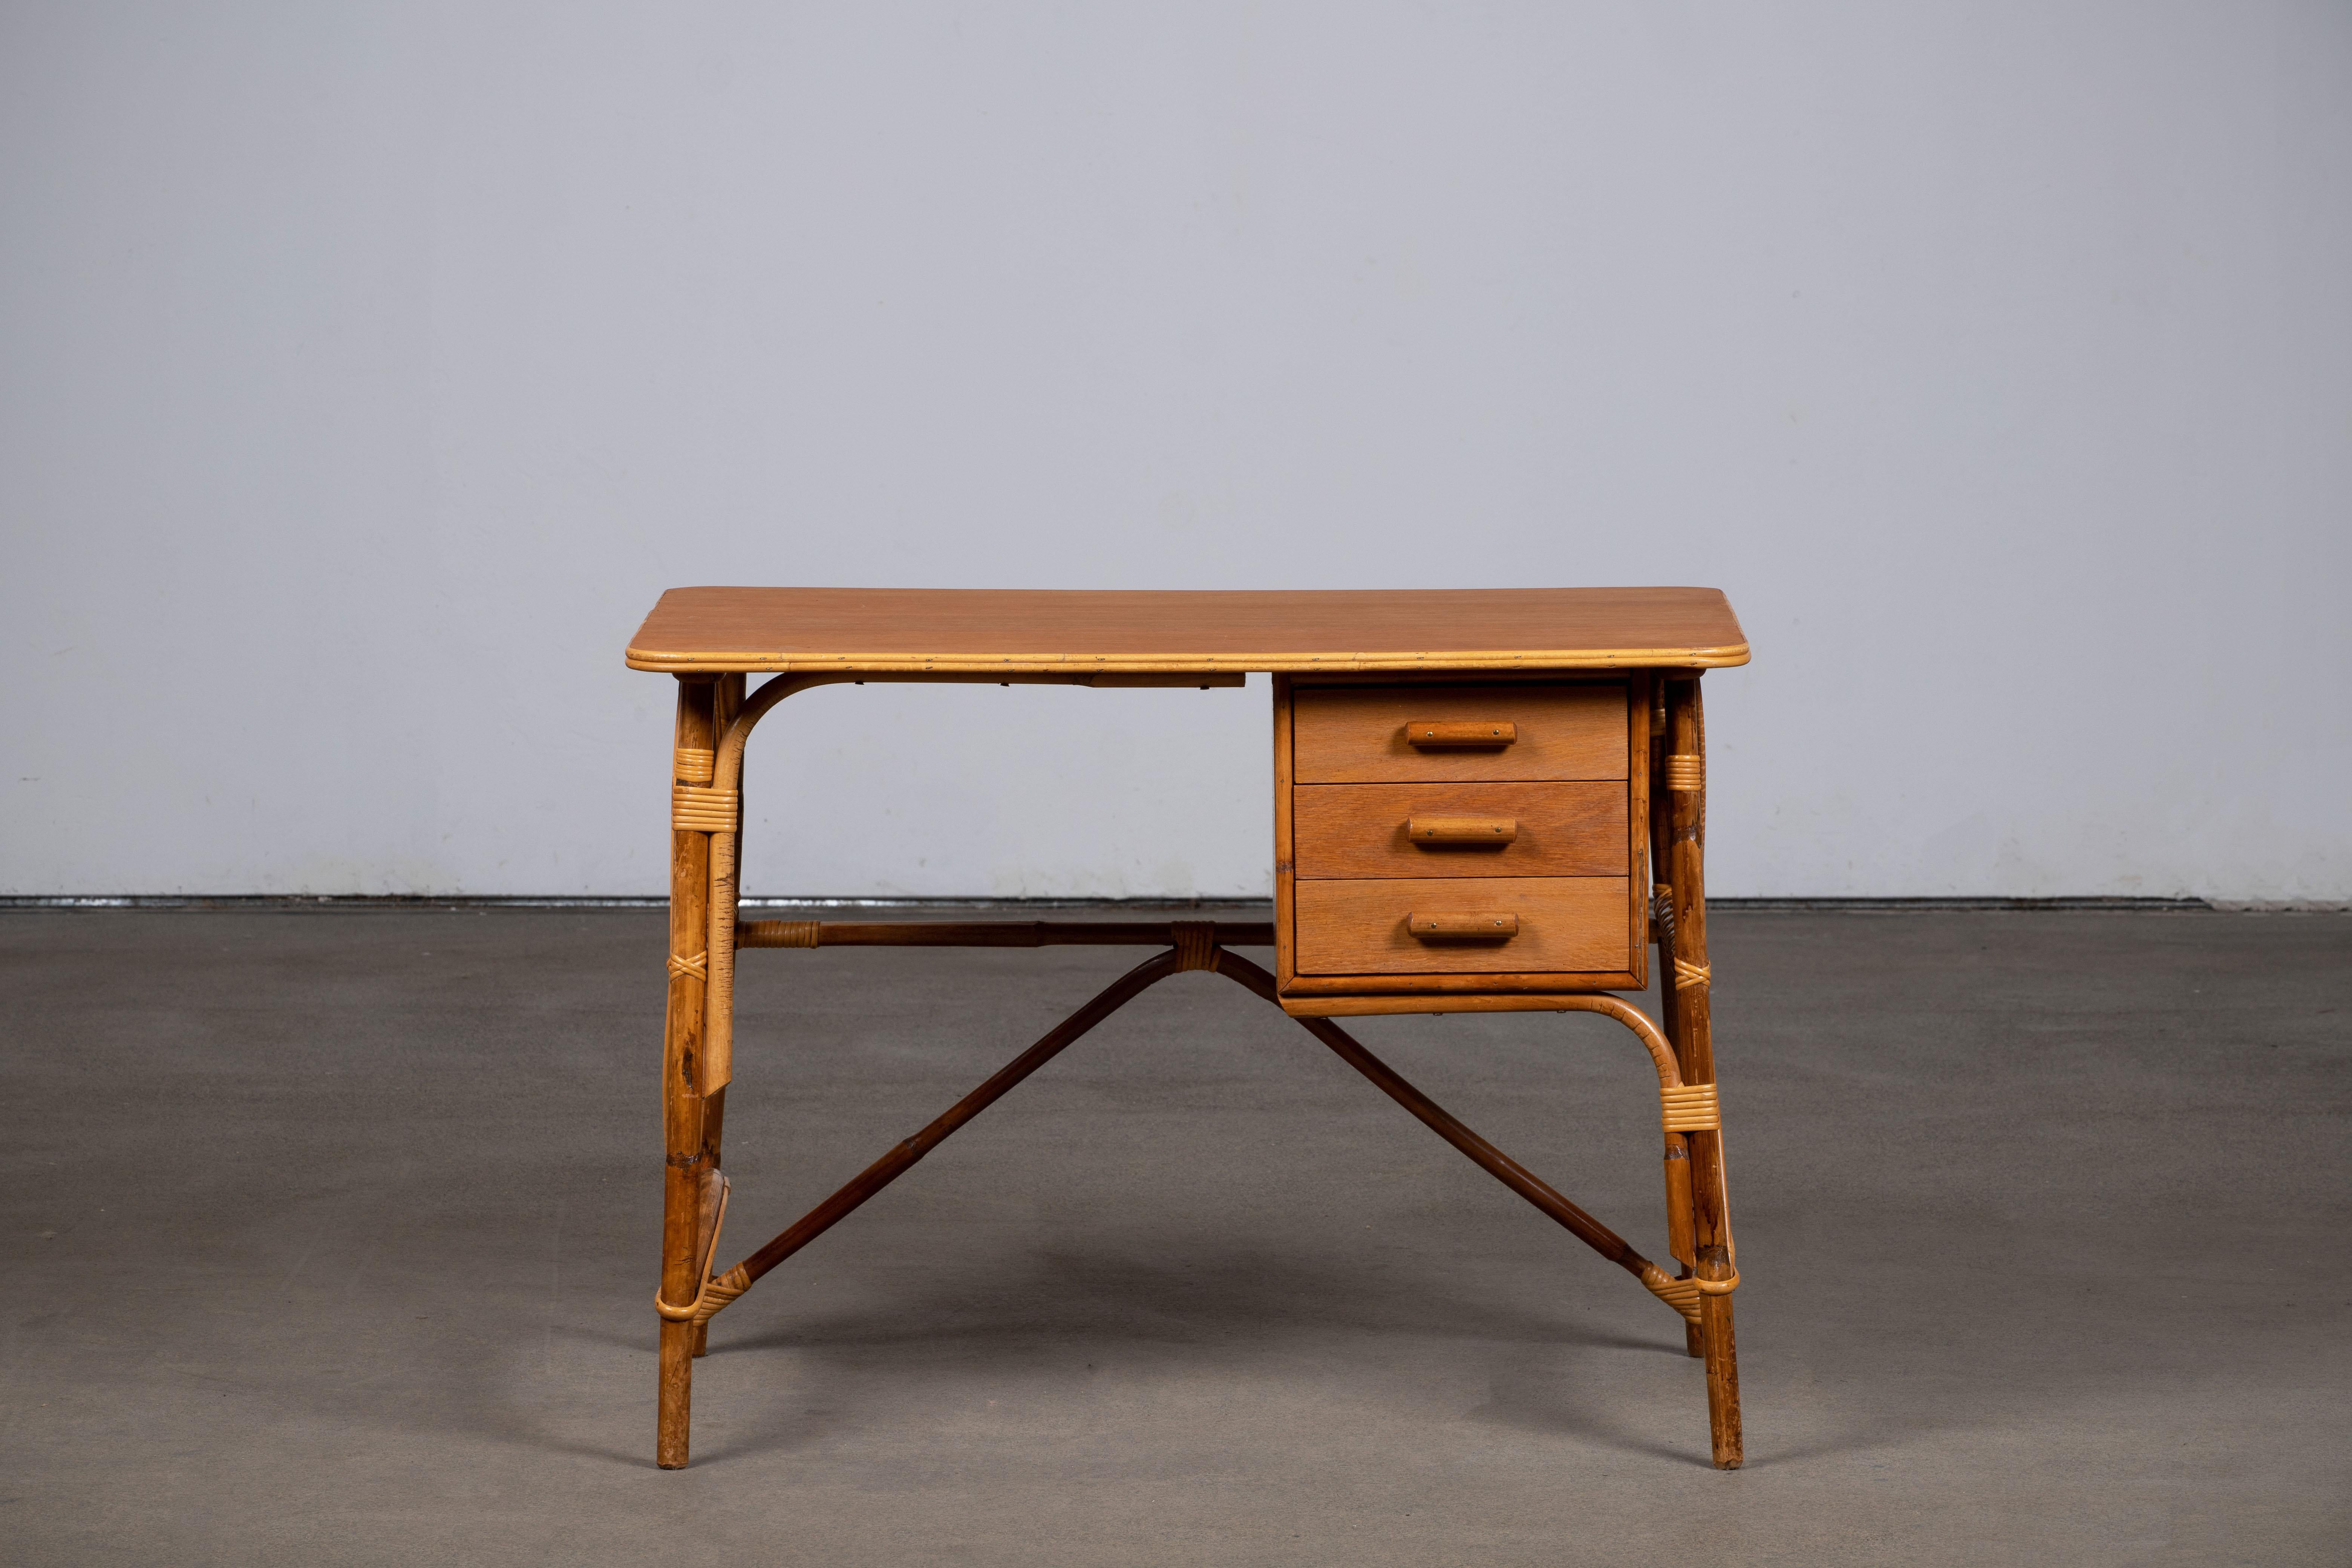 Desk Louis Sognot 50s
This pretty little vintage rattan desk from the 1950s by Louis Sognot can be used by a child or an adult.The top is in light oak.

Its both authentic and bohemian side can only seduce you!

Louis Sognot (1892-1970) is a